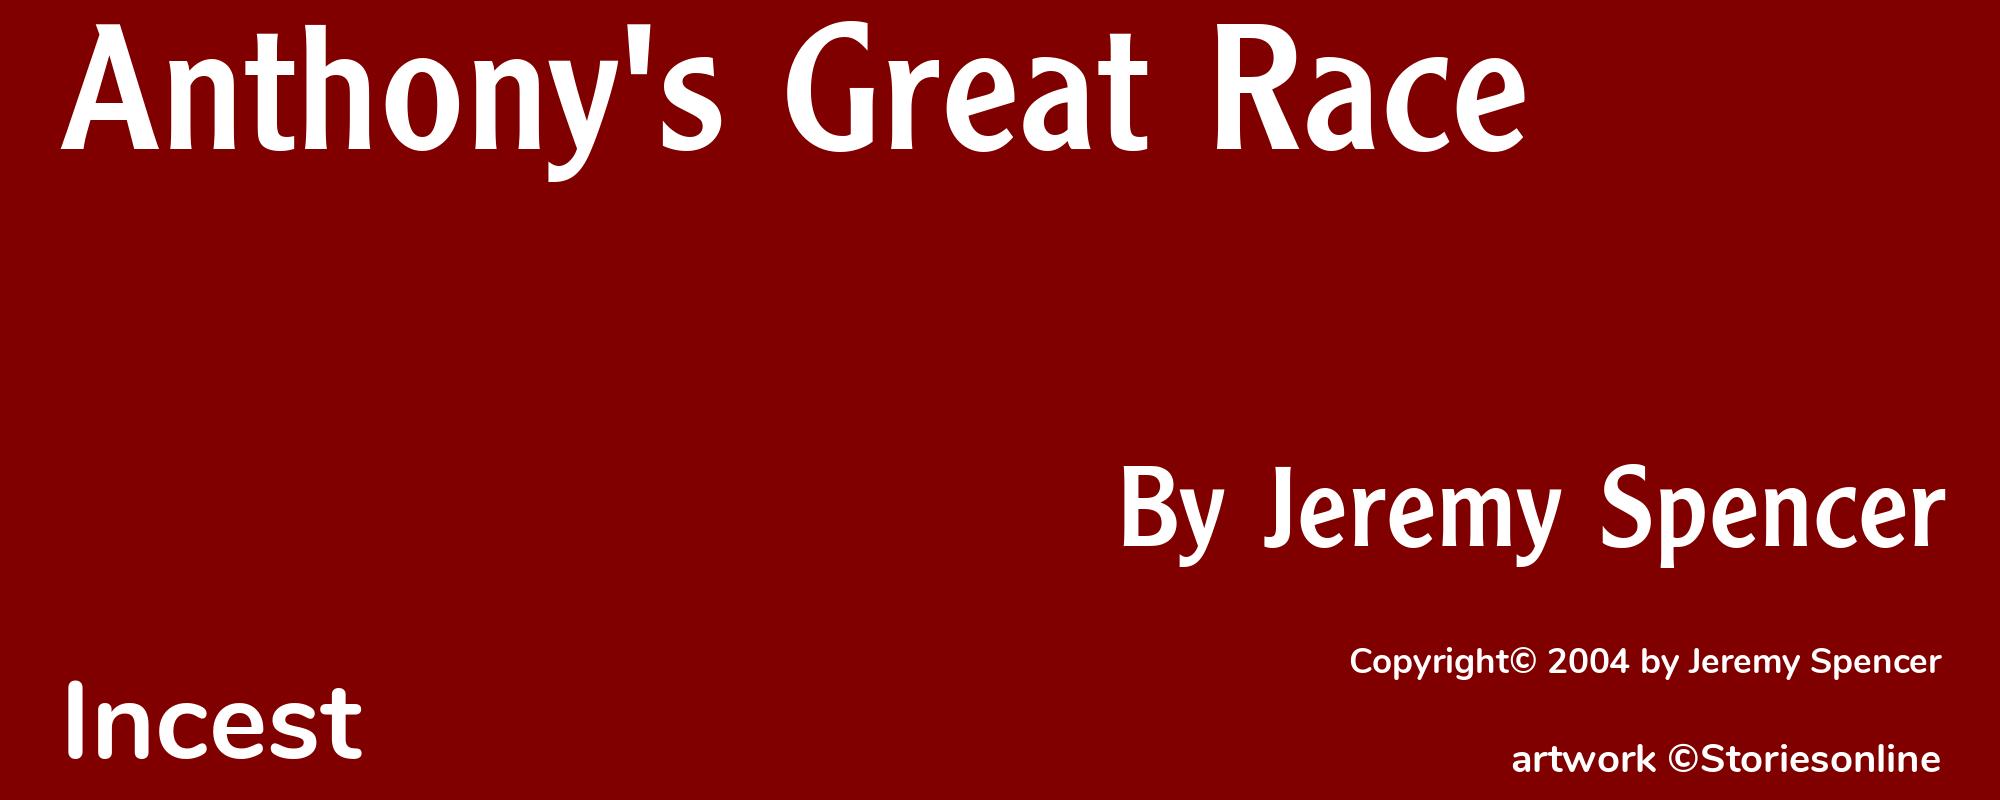 Anthony's Great Race - Cover